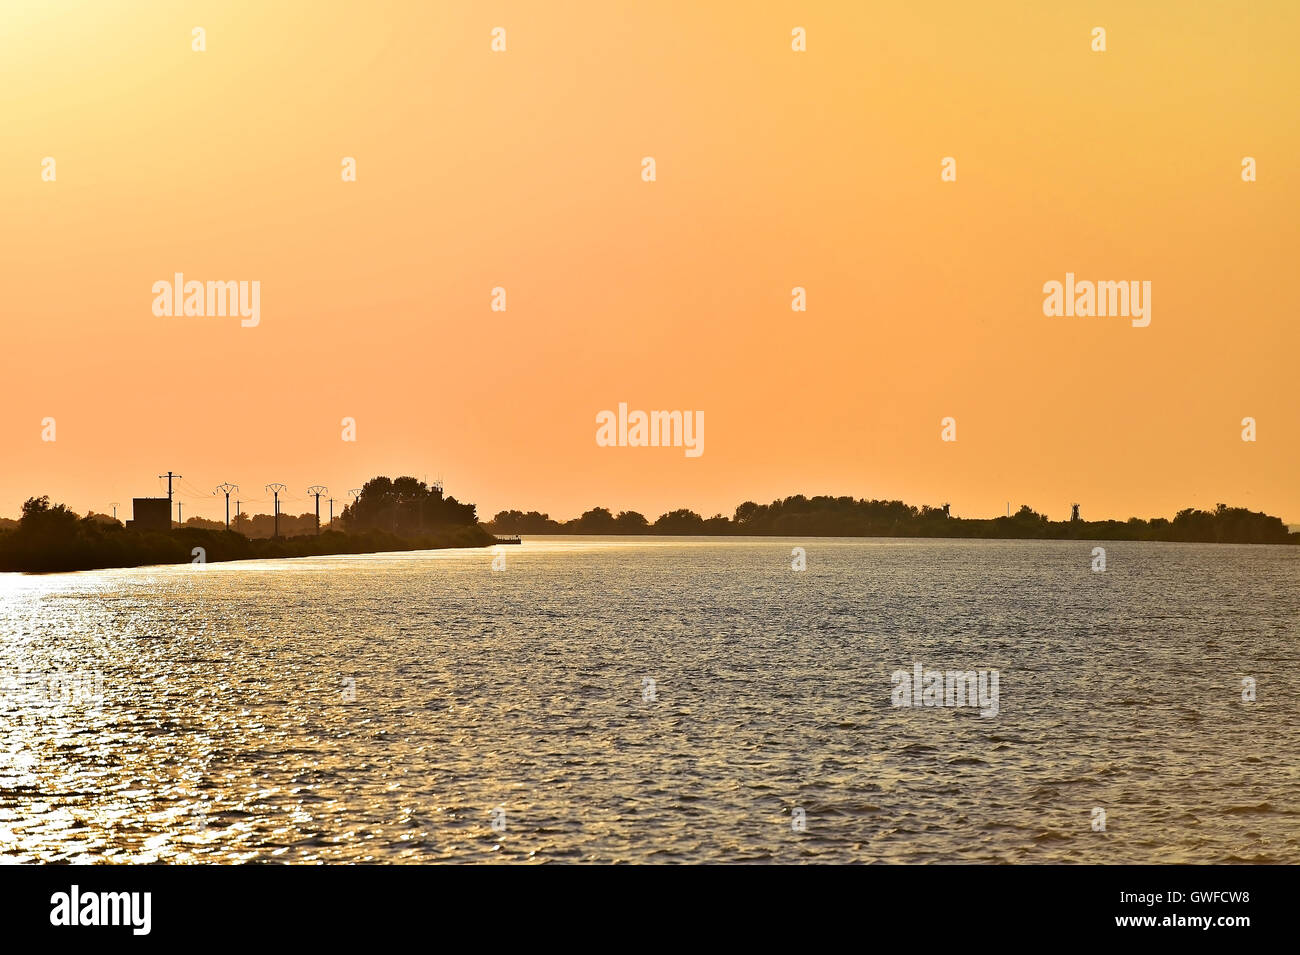 Sulina branch of the Danube river in Romania at sunset Stock Photo